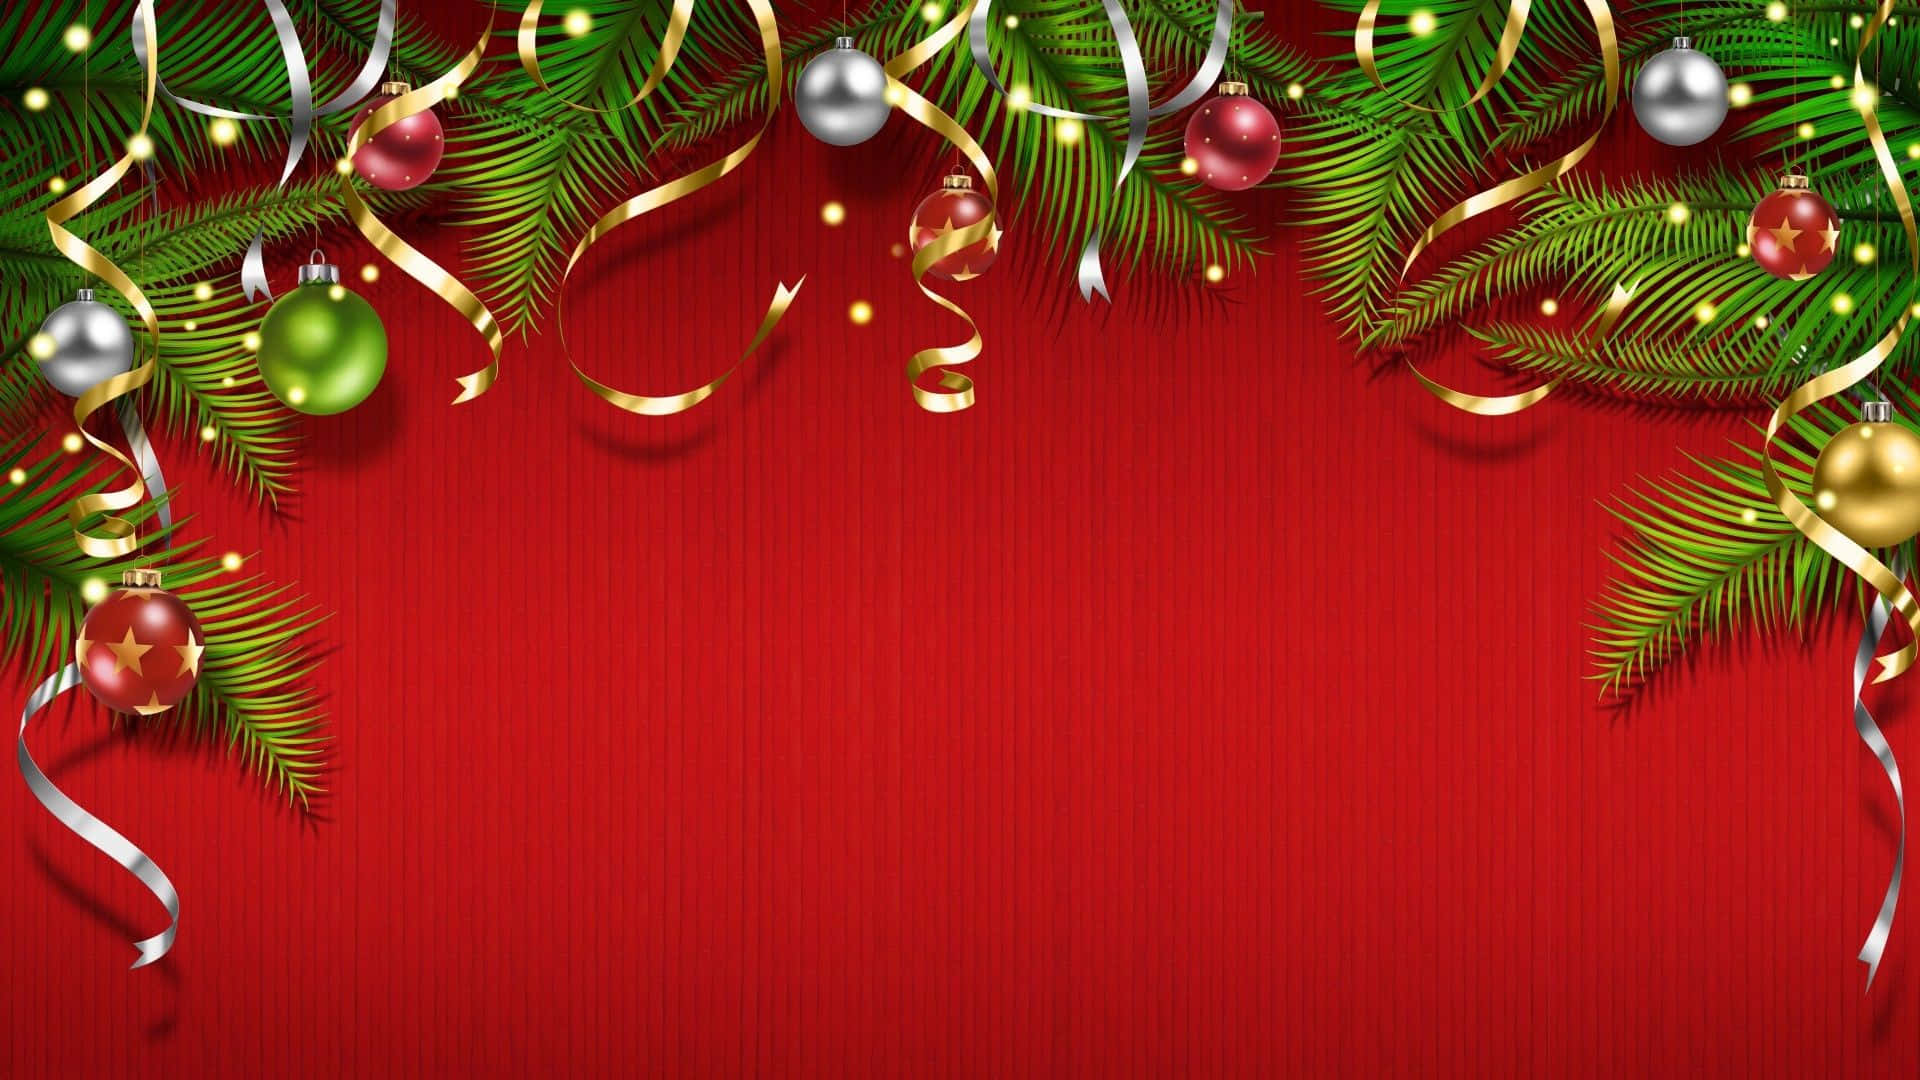 Christmas Background With Christmas Balls And Ribbons Wallpaper